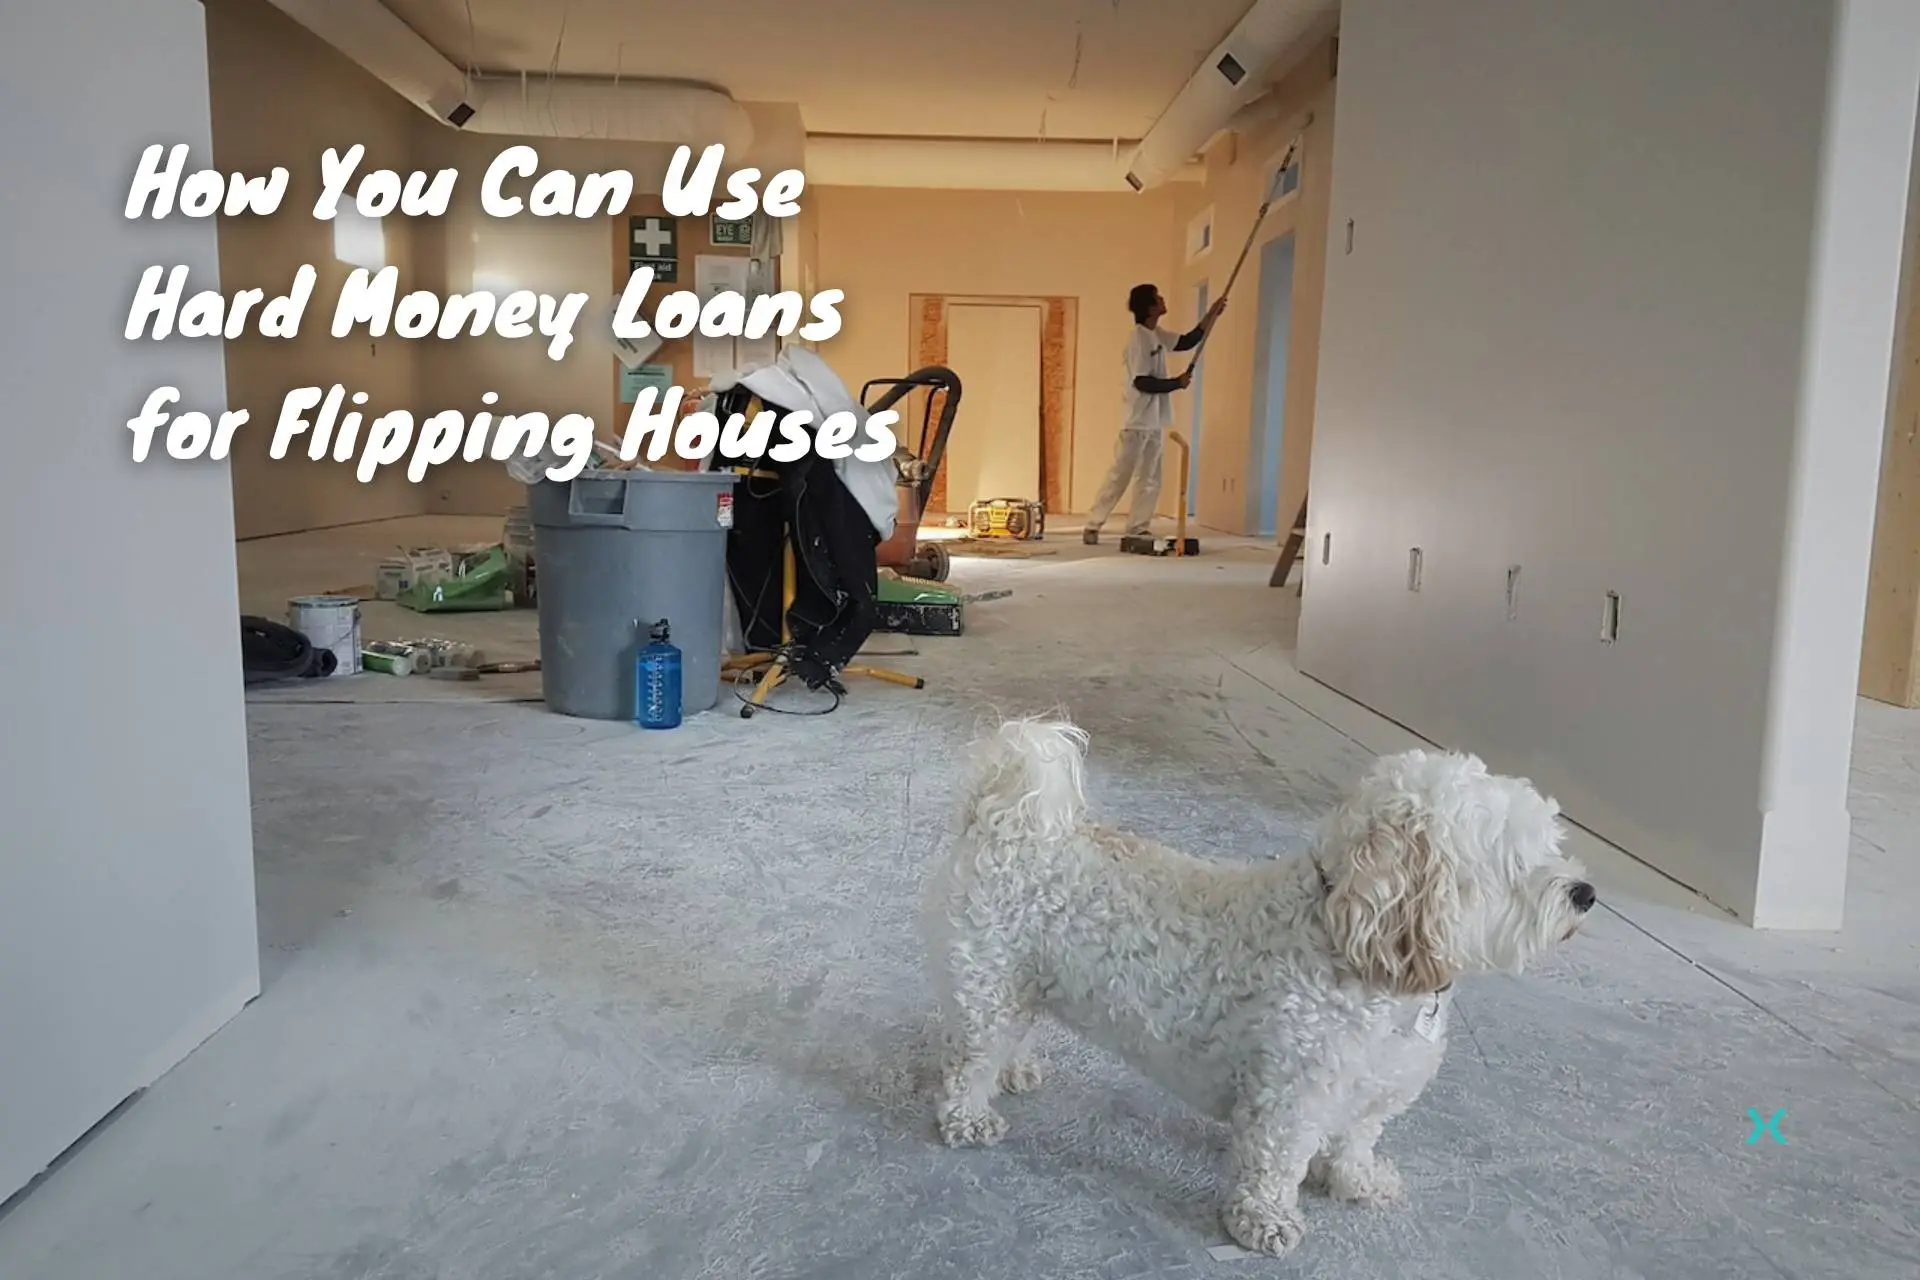 How You Can Use Hard Money Loans for Flipping Houses